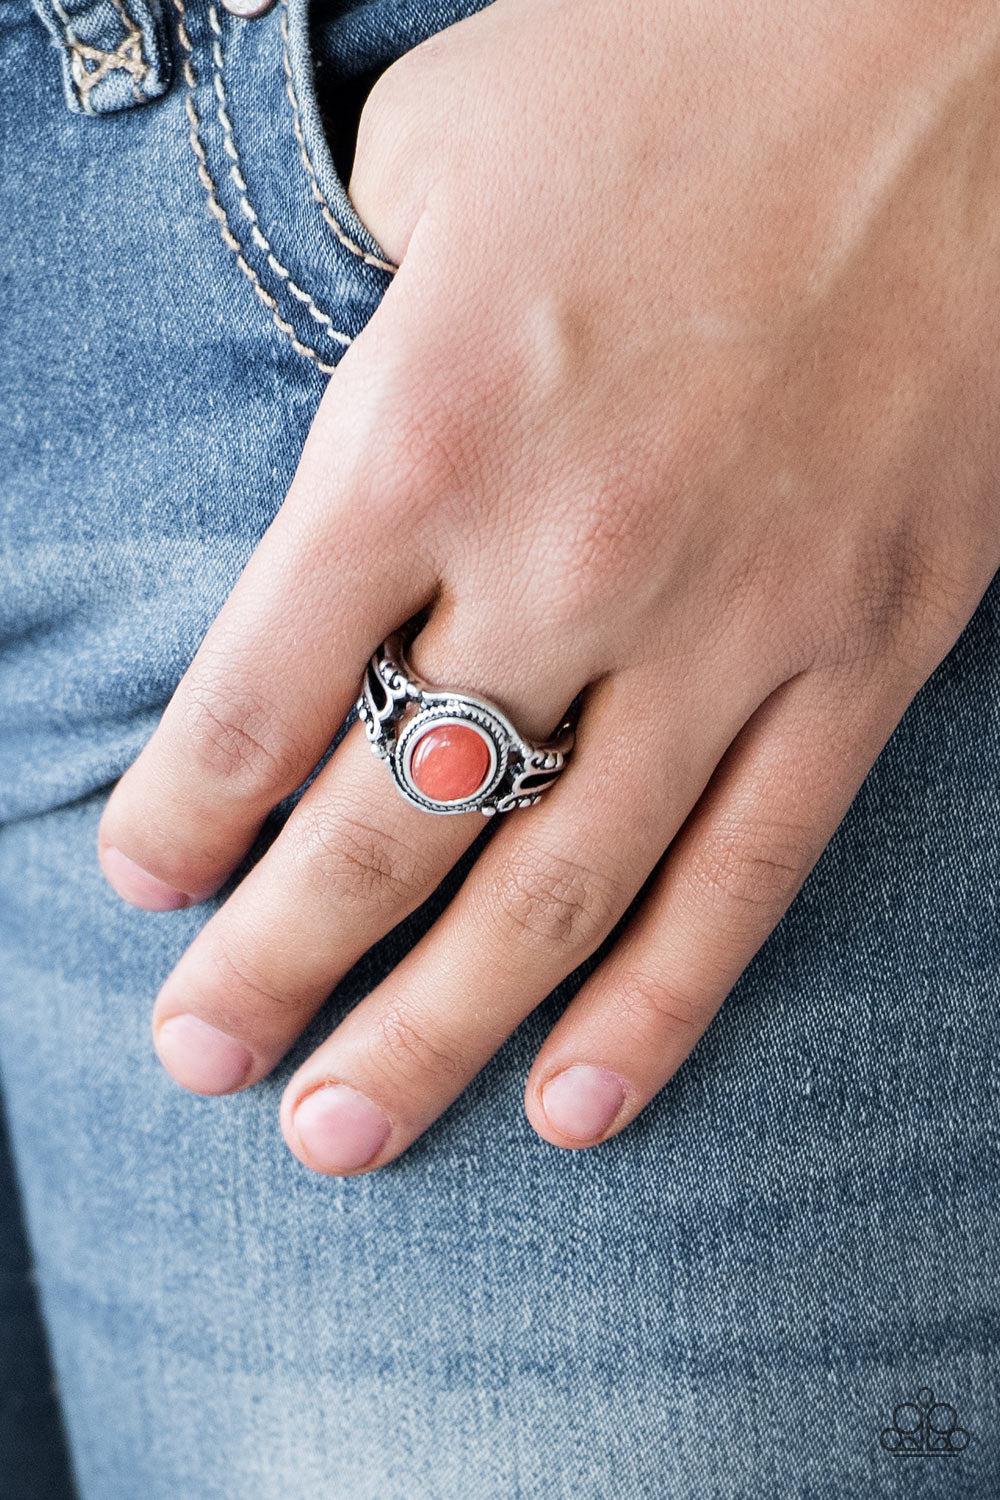 Peacefully Peaceful Orange Cat&#39;s Eye Stone Ring - Paparazzi Accessories-on model - CarasShop.com - $5 Jewelry by Cara Jewels